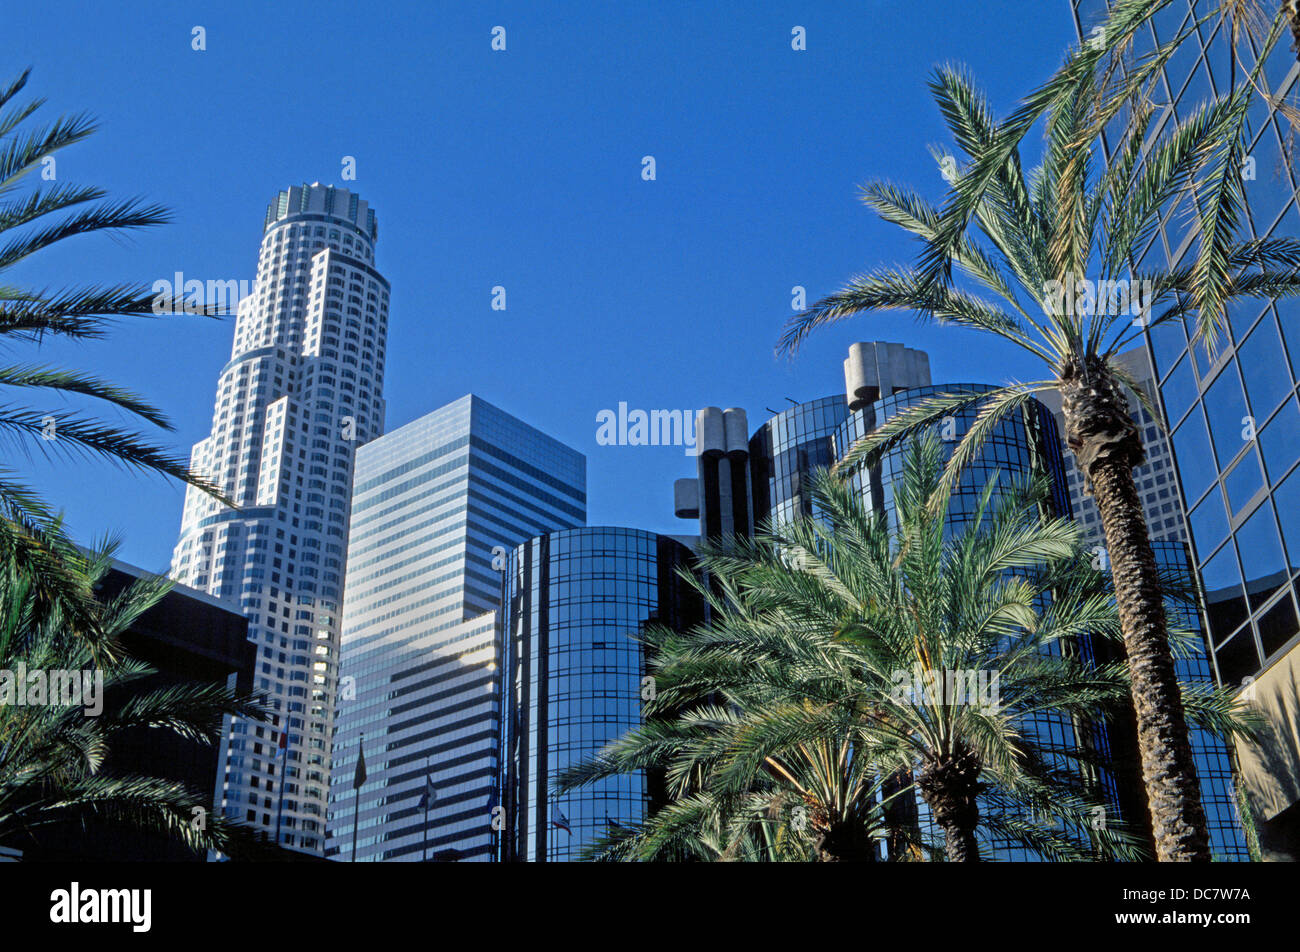 Skyscrapers of varied architectural designs give a distinctive skyline to the downtown financial district in Los Angeles, California, USA. Stock Photo